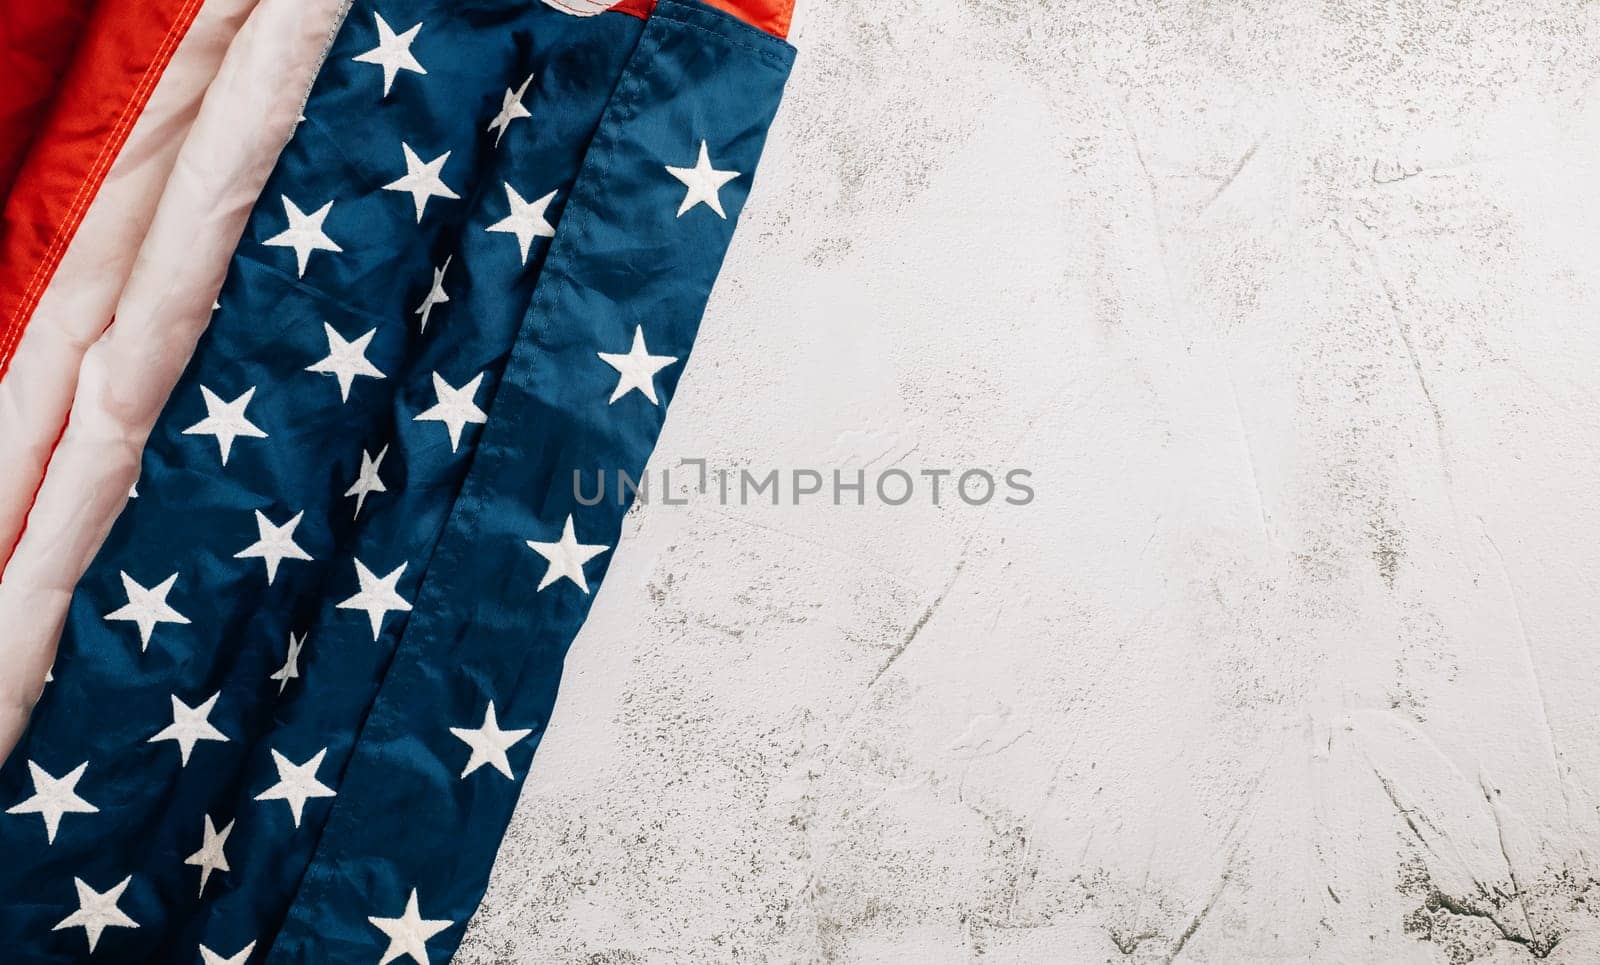 For Veteran's Day, a vintage American flag stands tall, symbolizing honor, unity, and pride in the United States. Patriotic stars and stripes are symbolic. isolated on cement background